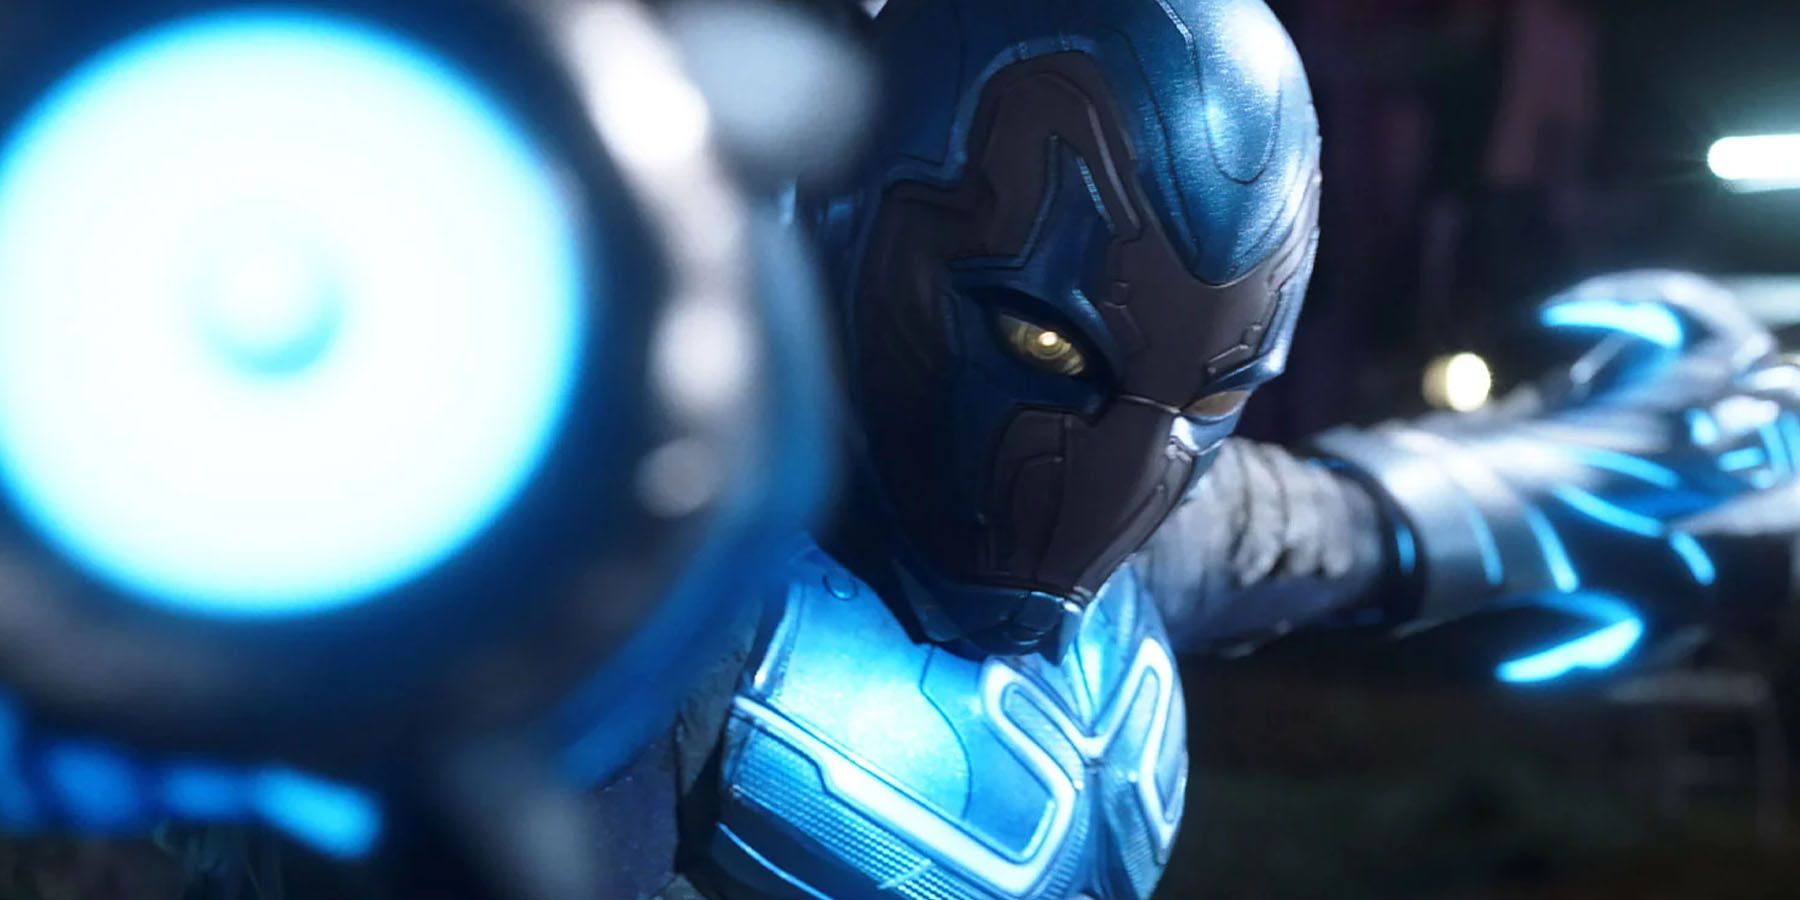 A screenshot of Blue Beetle firing his cannons in the Blue Beetle movie.